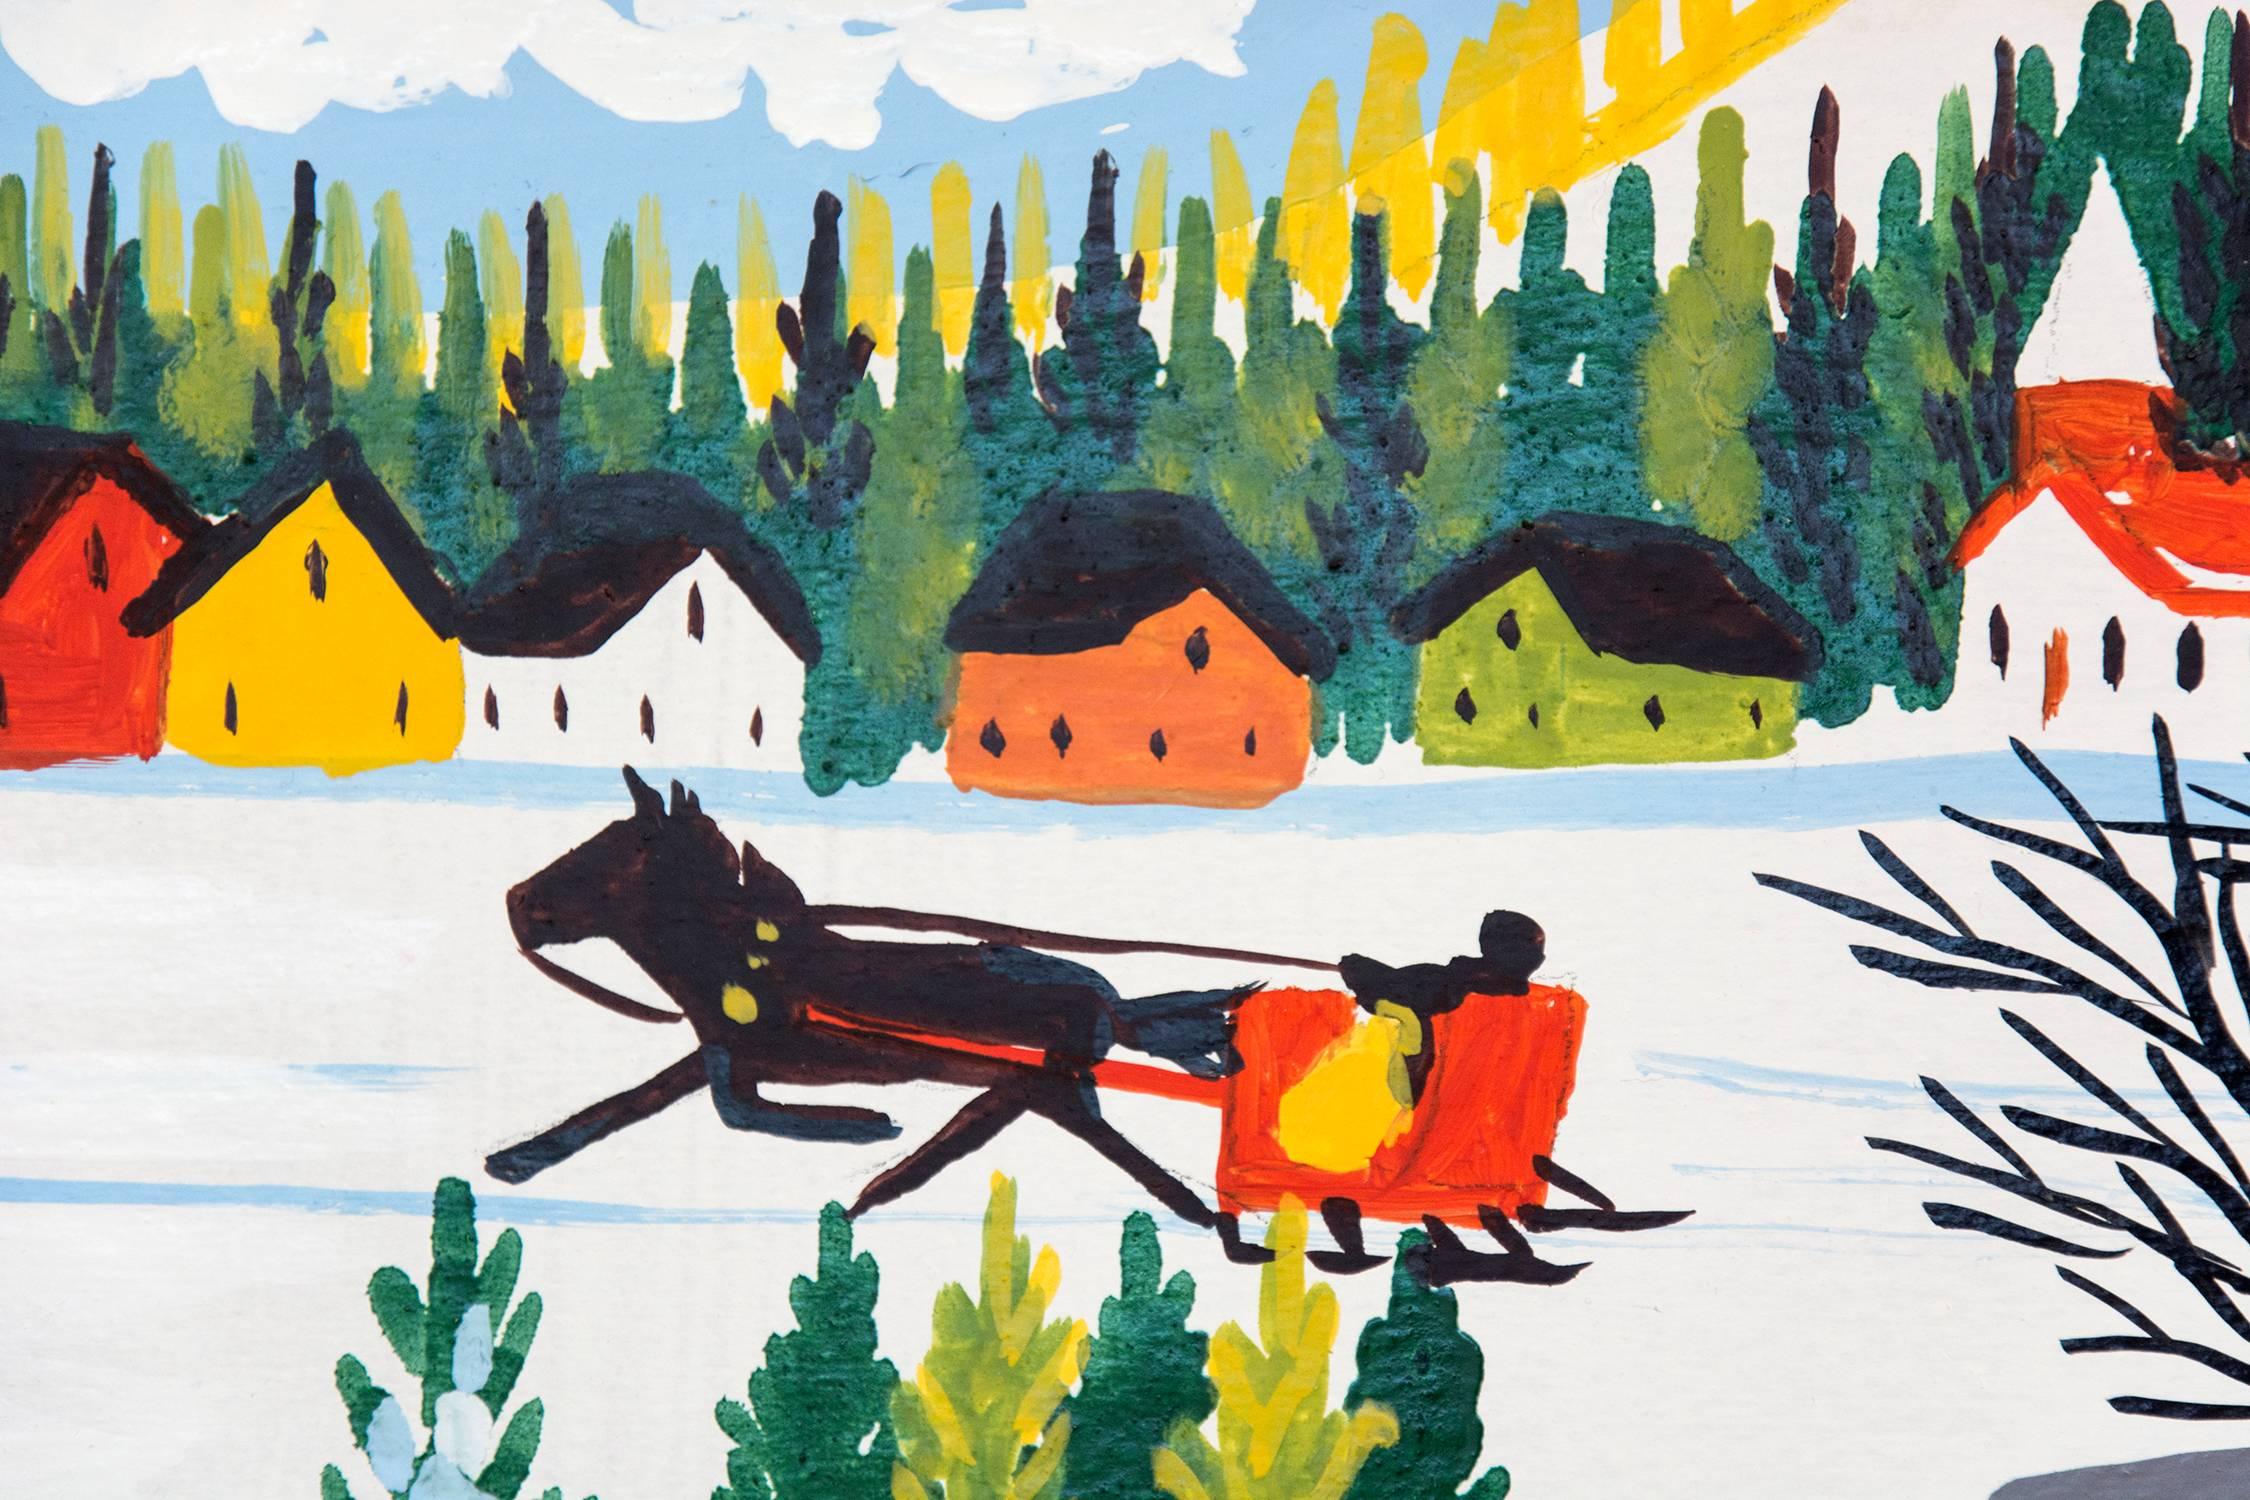 Three horse drawn sleighs pass through a covered bridge towards a brightly colored village in this delightful winter scene by folk artist Maud Lewis. This painting is signed and framed without glass. Framed dimensions are 13.25 x 15.25